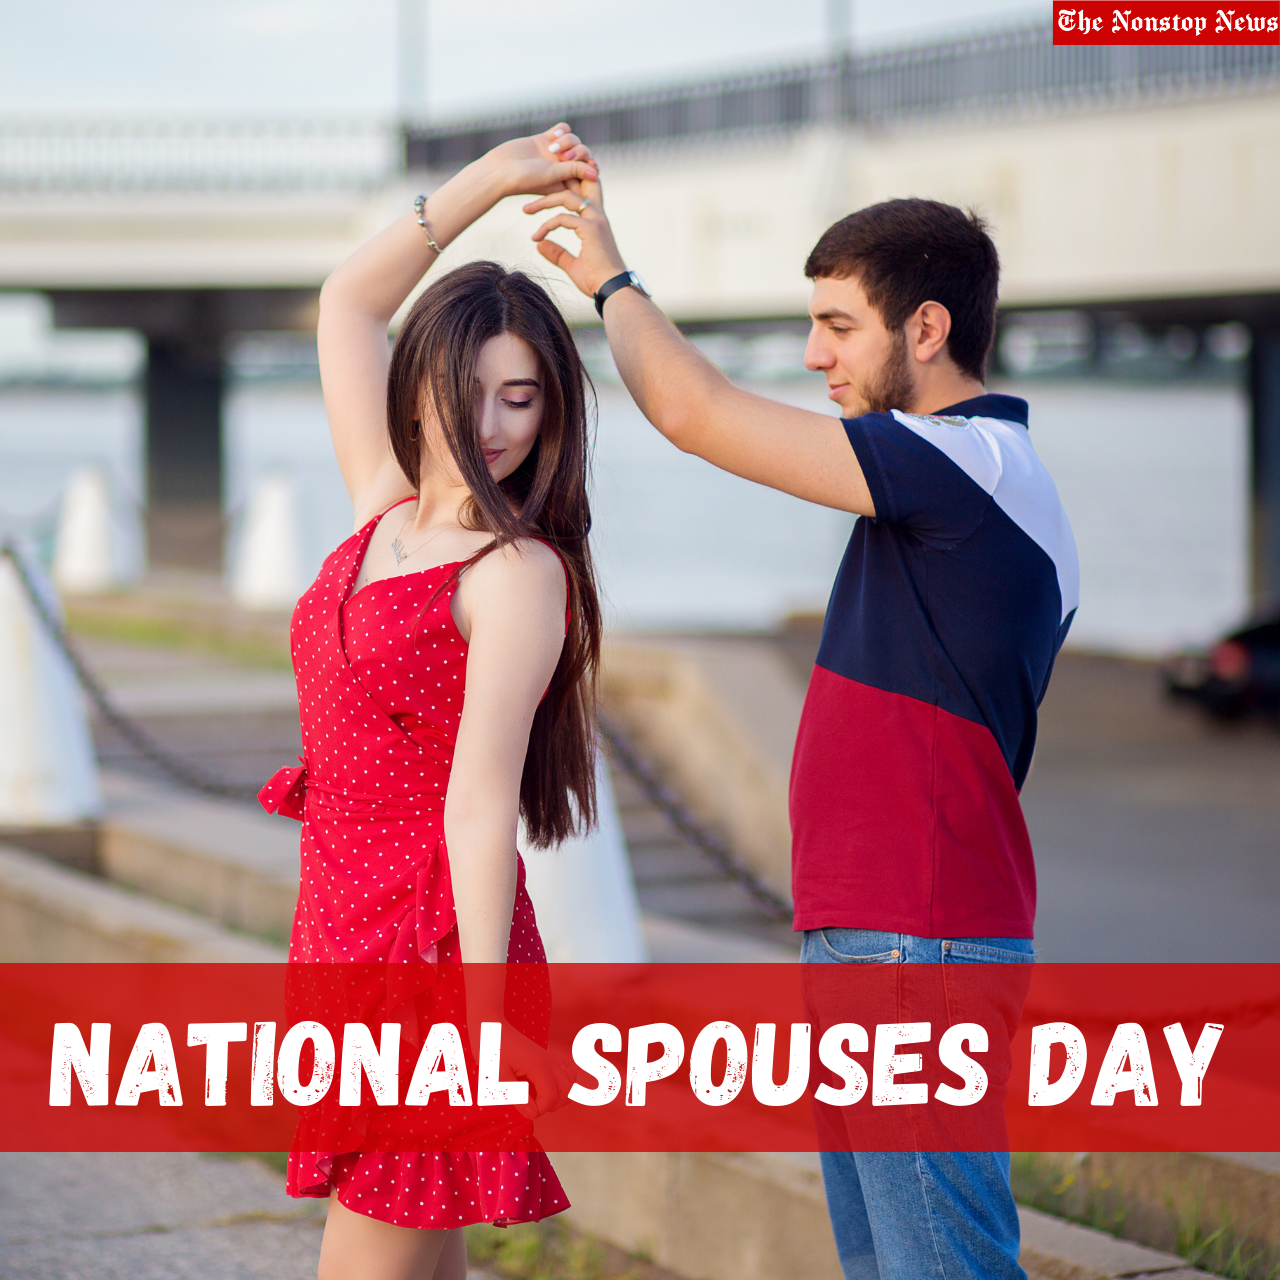 National Spouses Day (USA) 2022: Quotes, HD Images, Memes, Greetings, Instagram Captions to Share